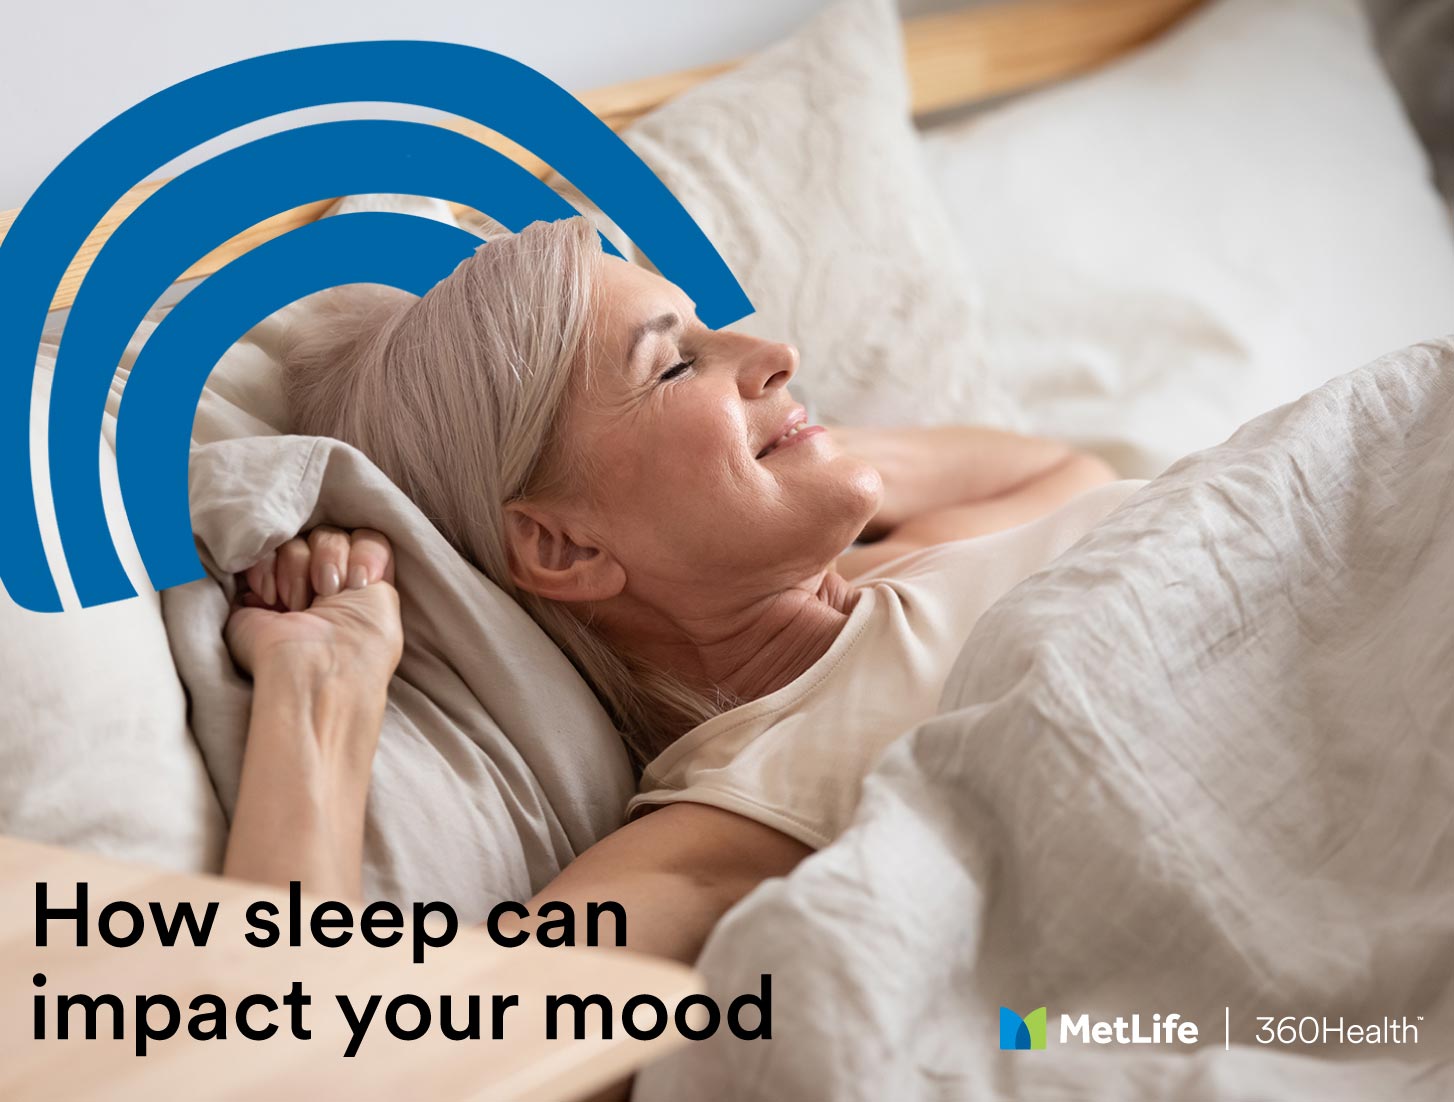 What's the link between sleep and mood?